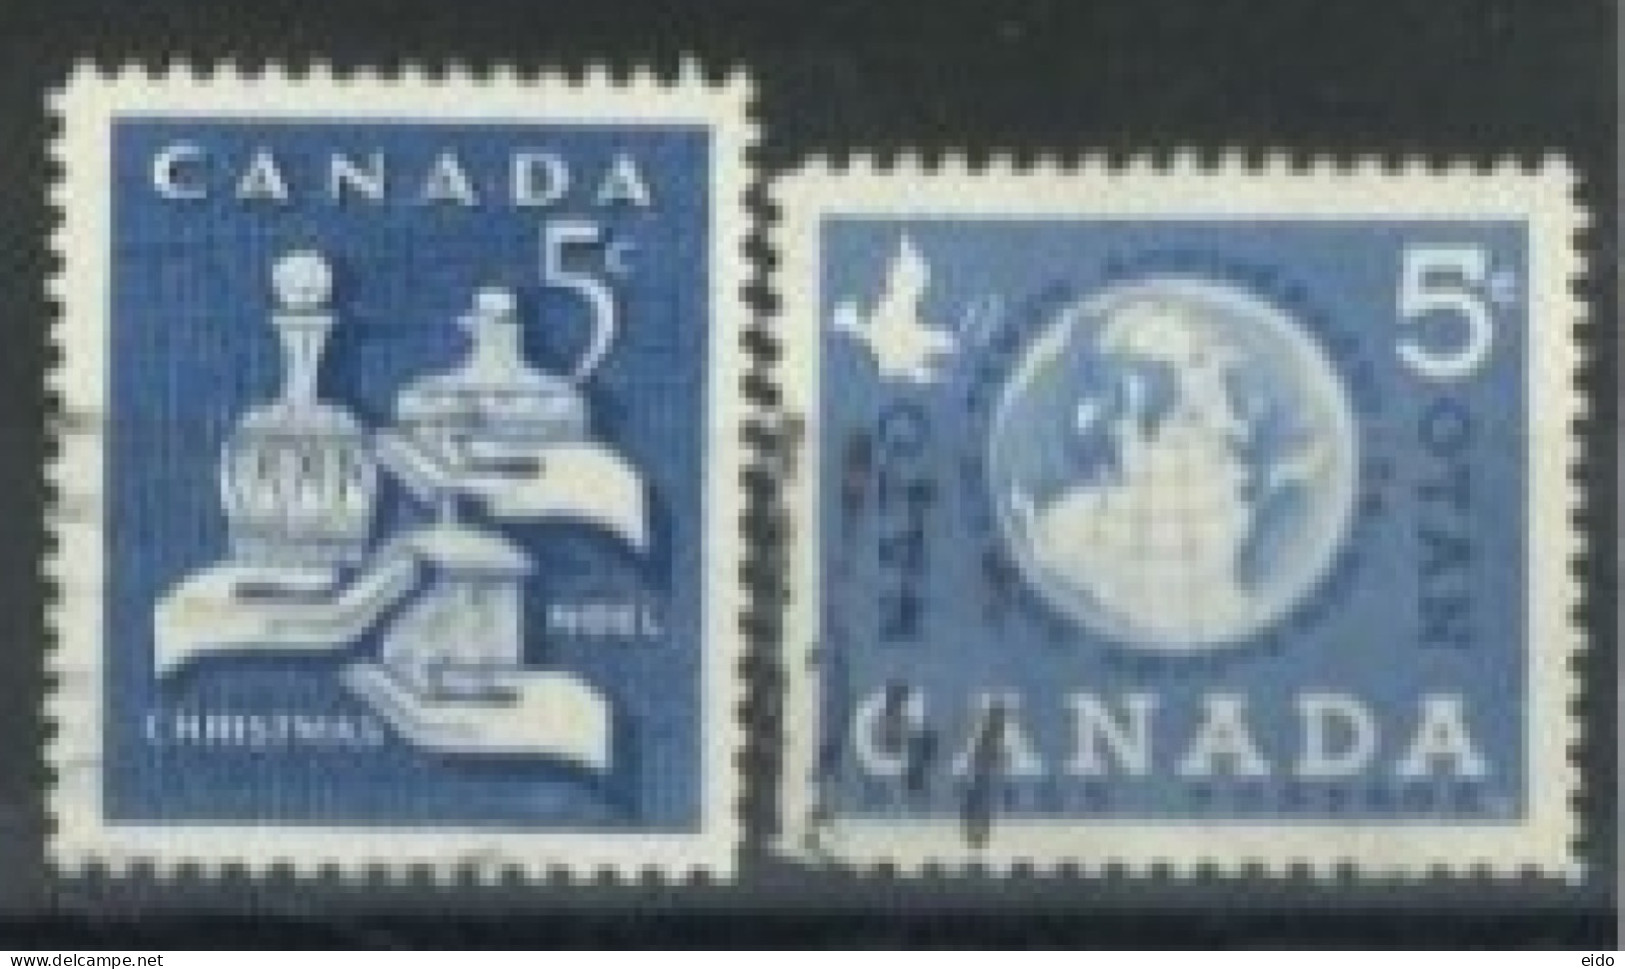 CANADA -  STAMPS SET OF 2, USED. - Used Stamps